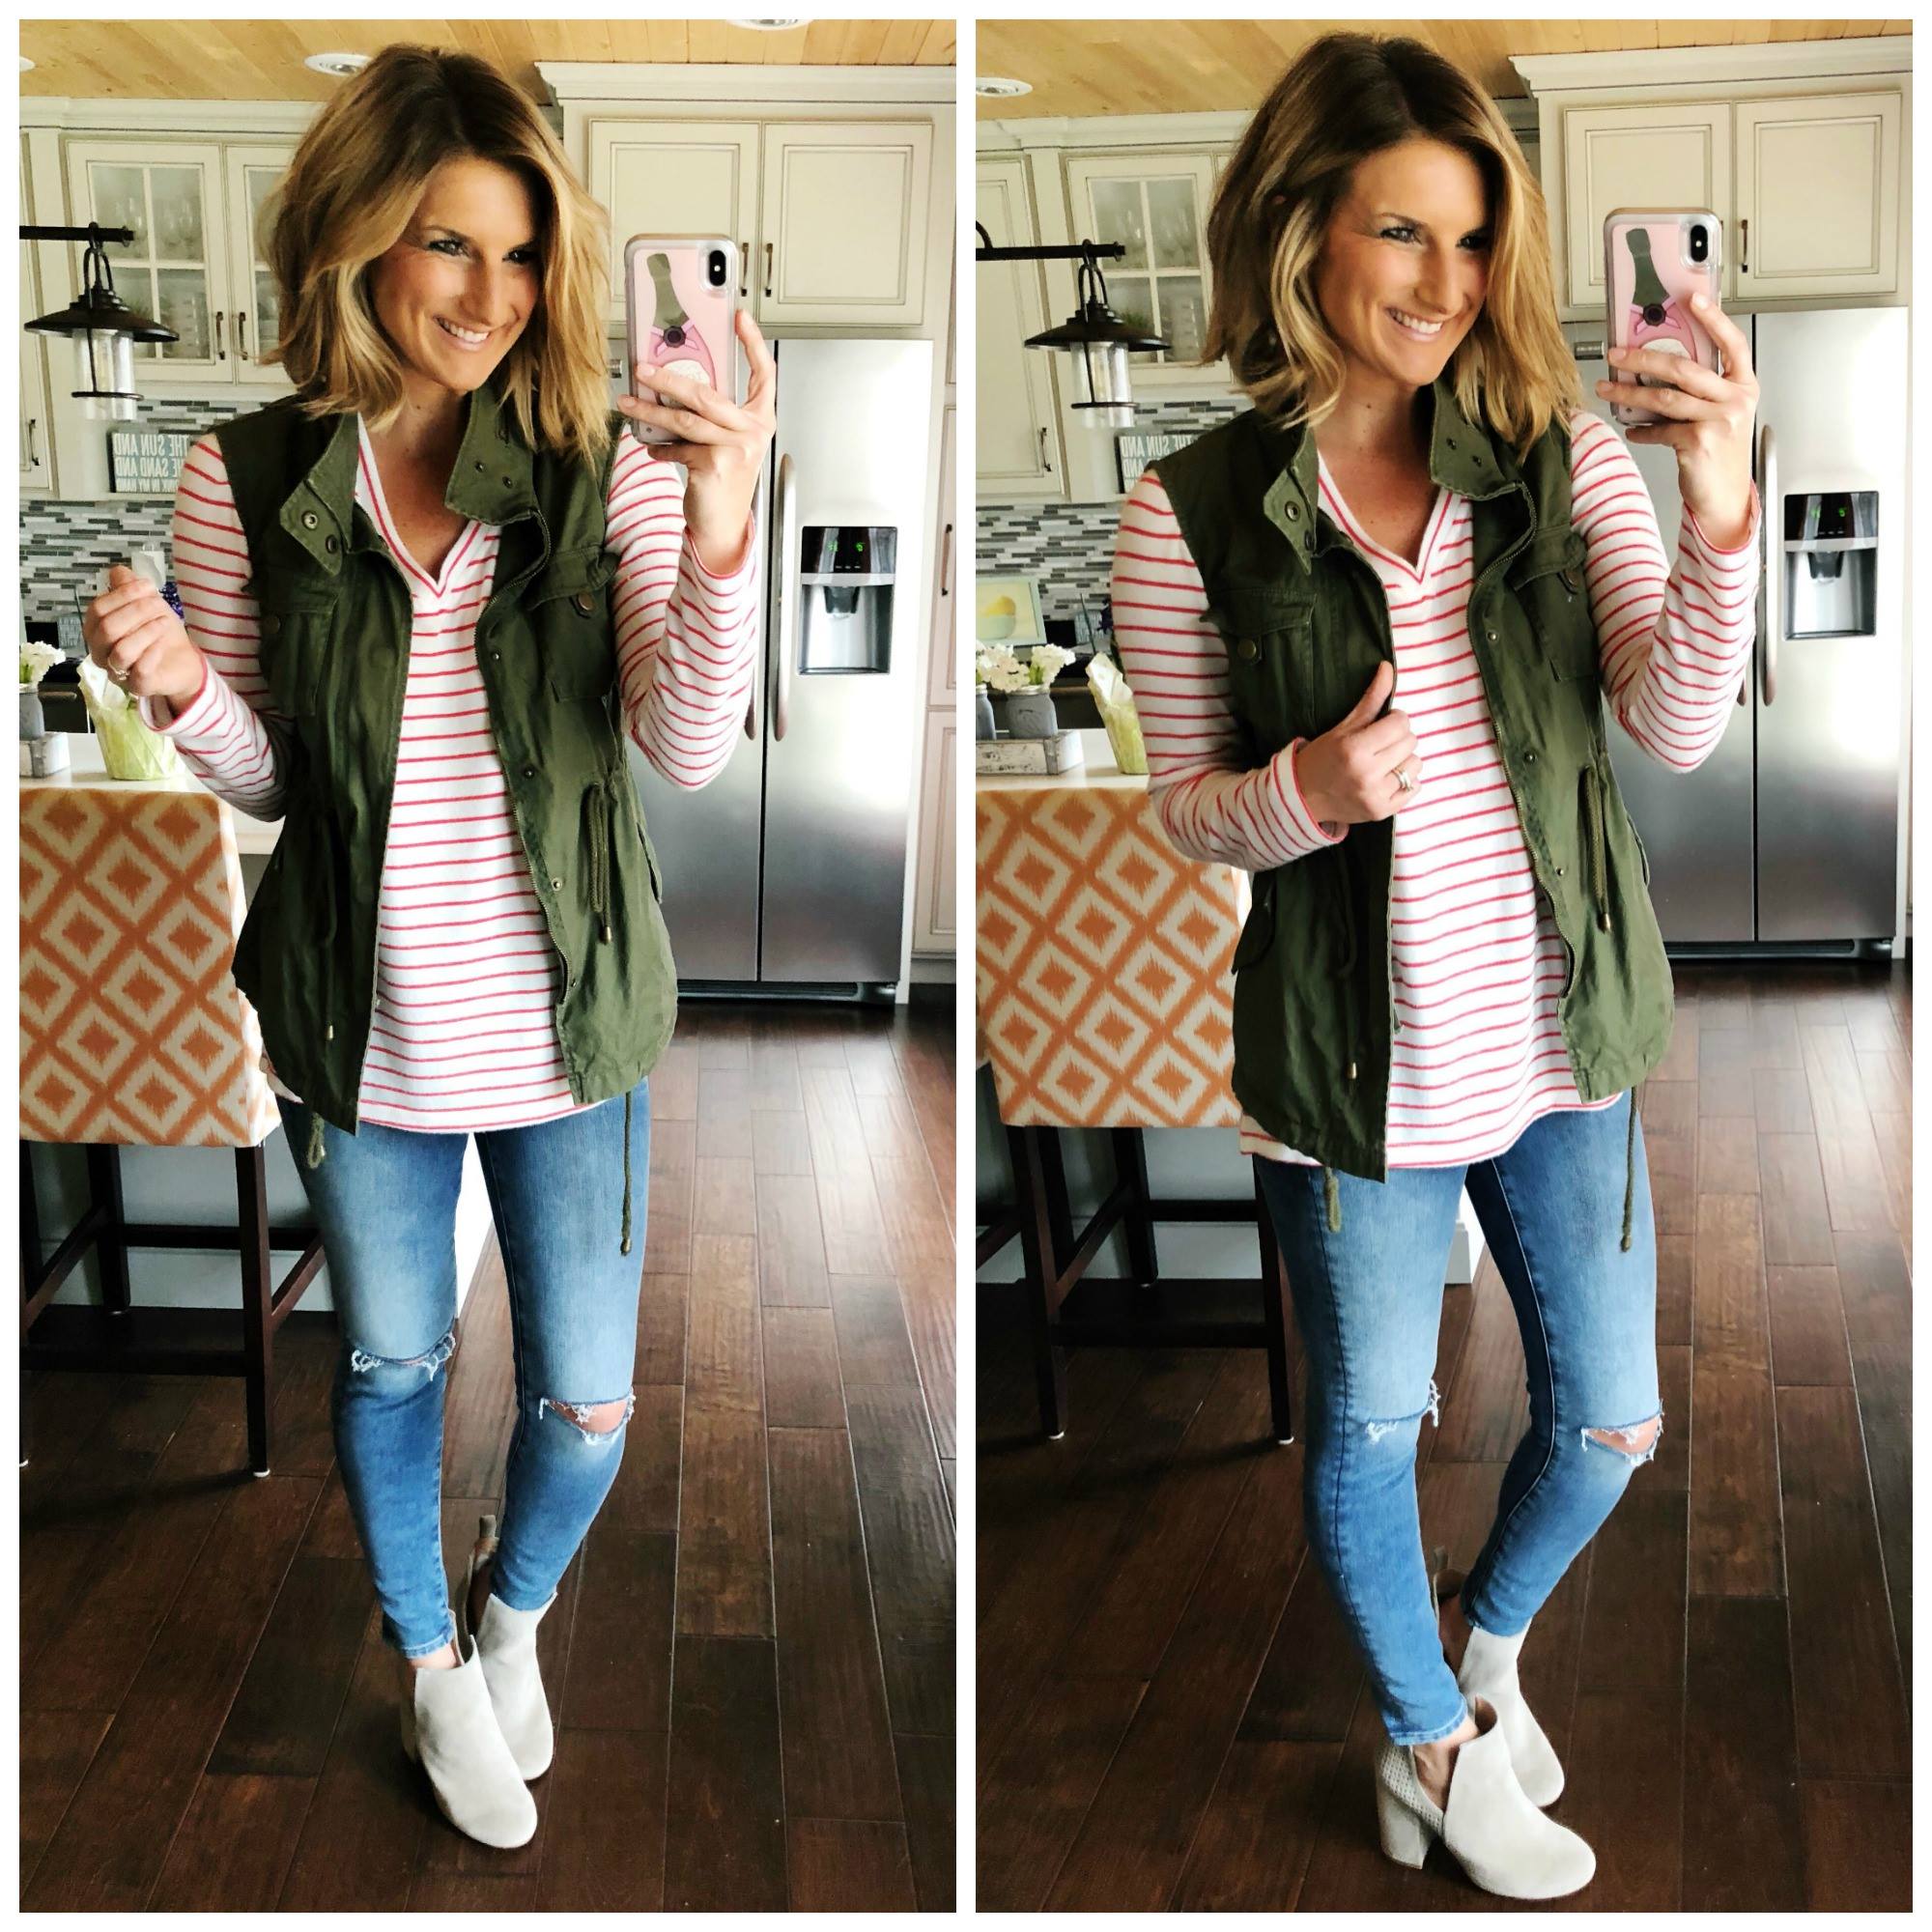 Spring Fashion // Striped Top + Cropped Jeggings + Military Vest + Cutout Booties // How to Wear a Military Vest in Spring